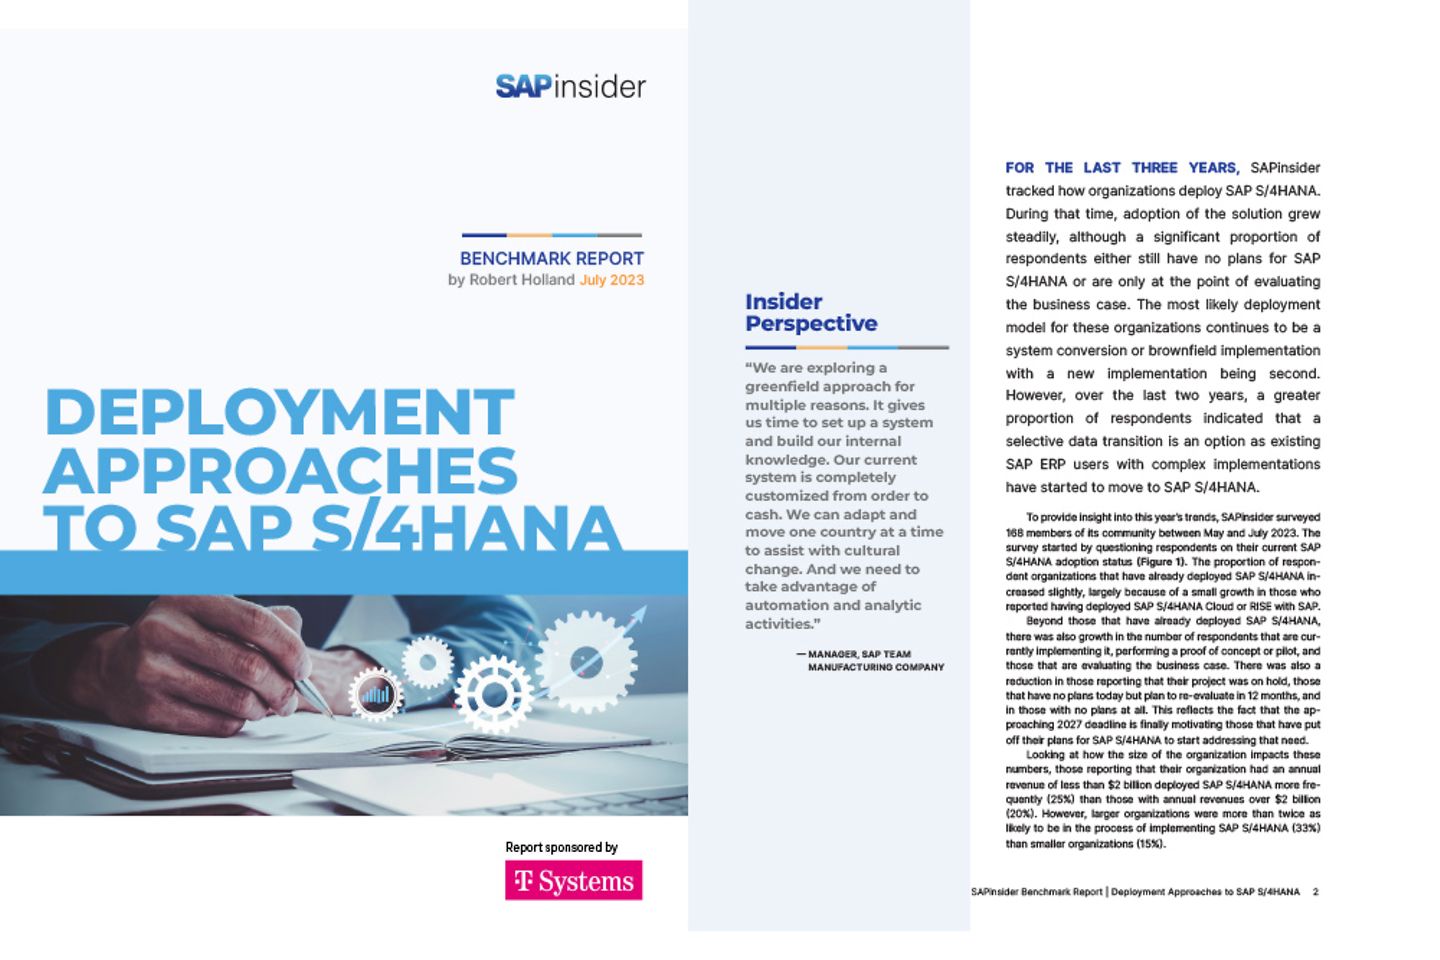 Cover and the next page as a screenshot showing the banchmark report: SAP S/4HANA Deployment